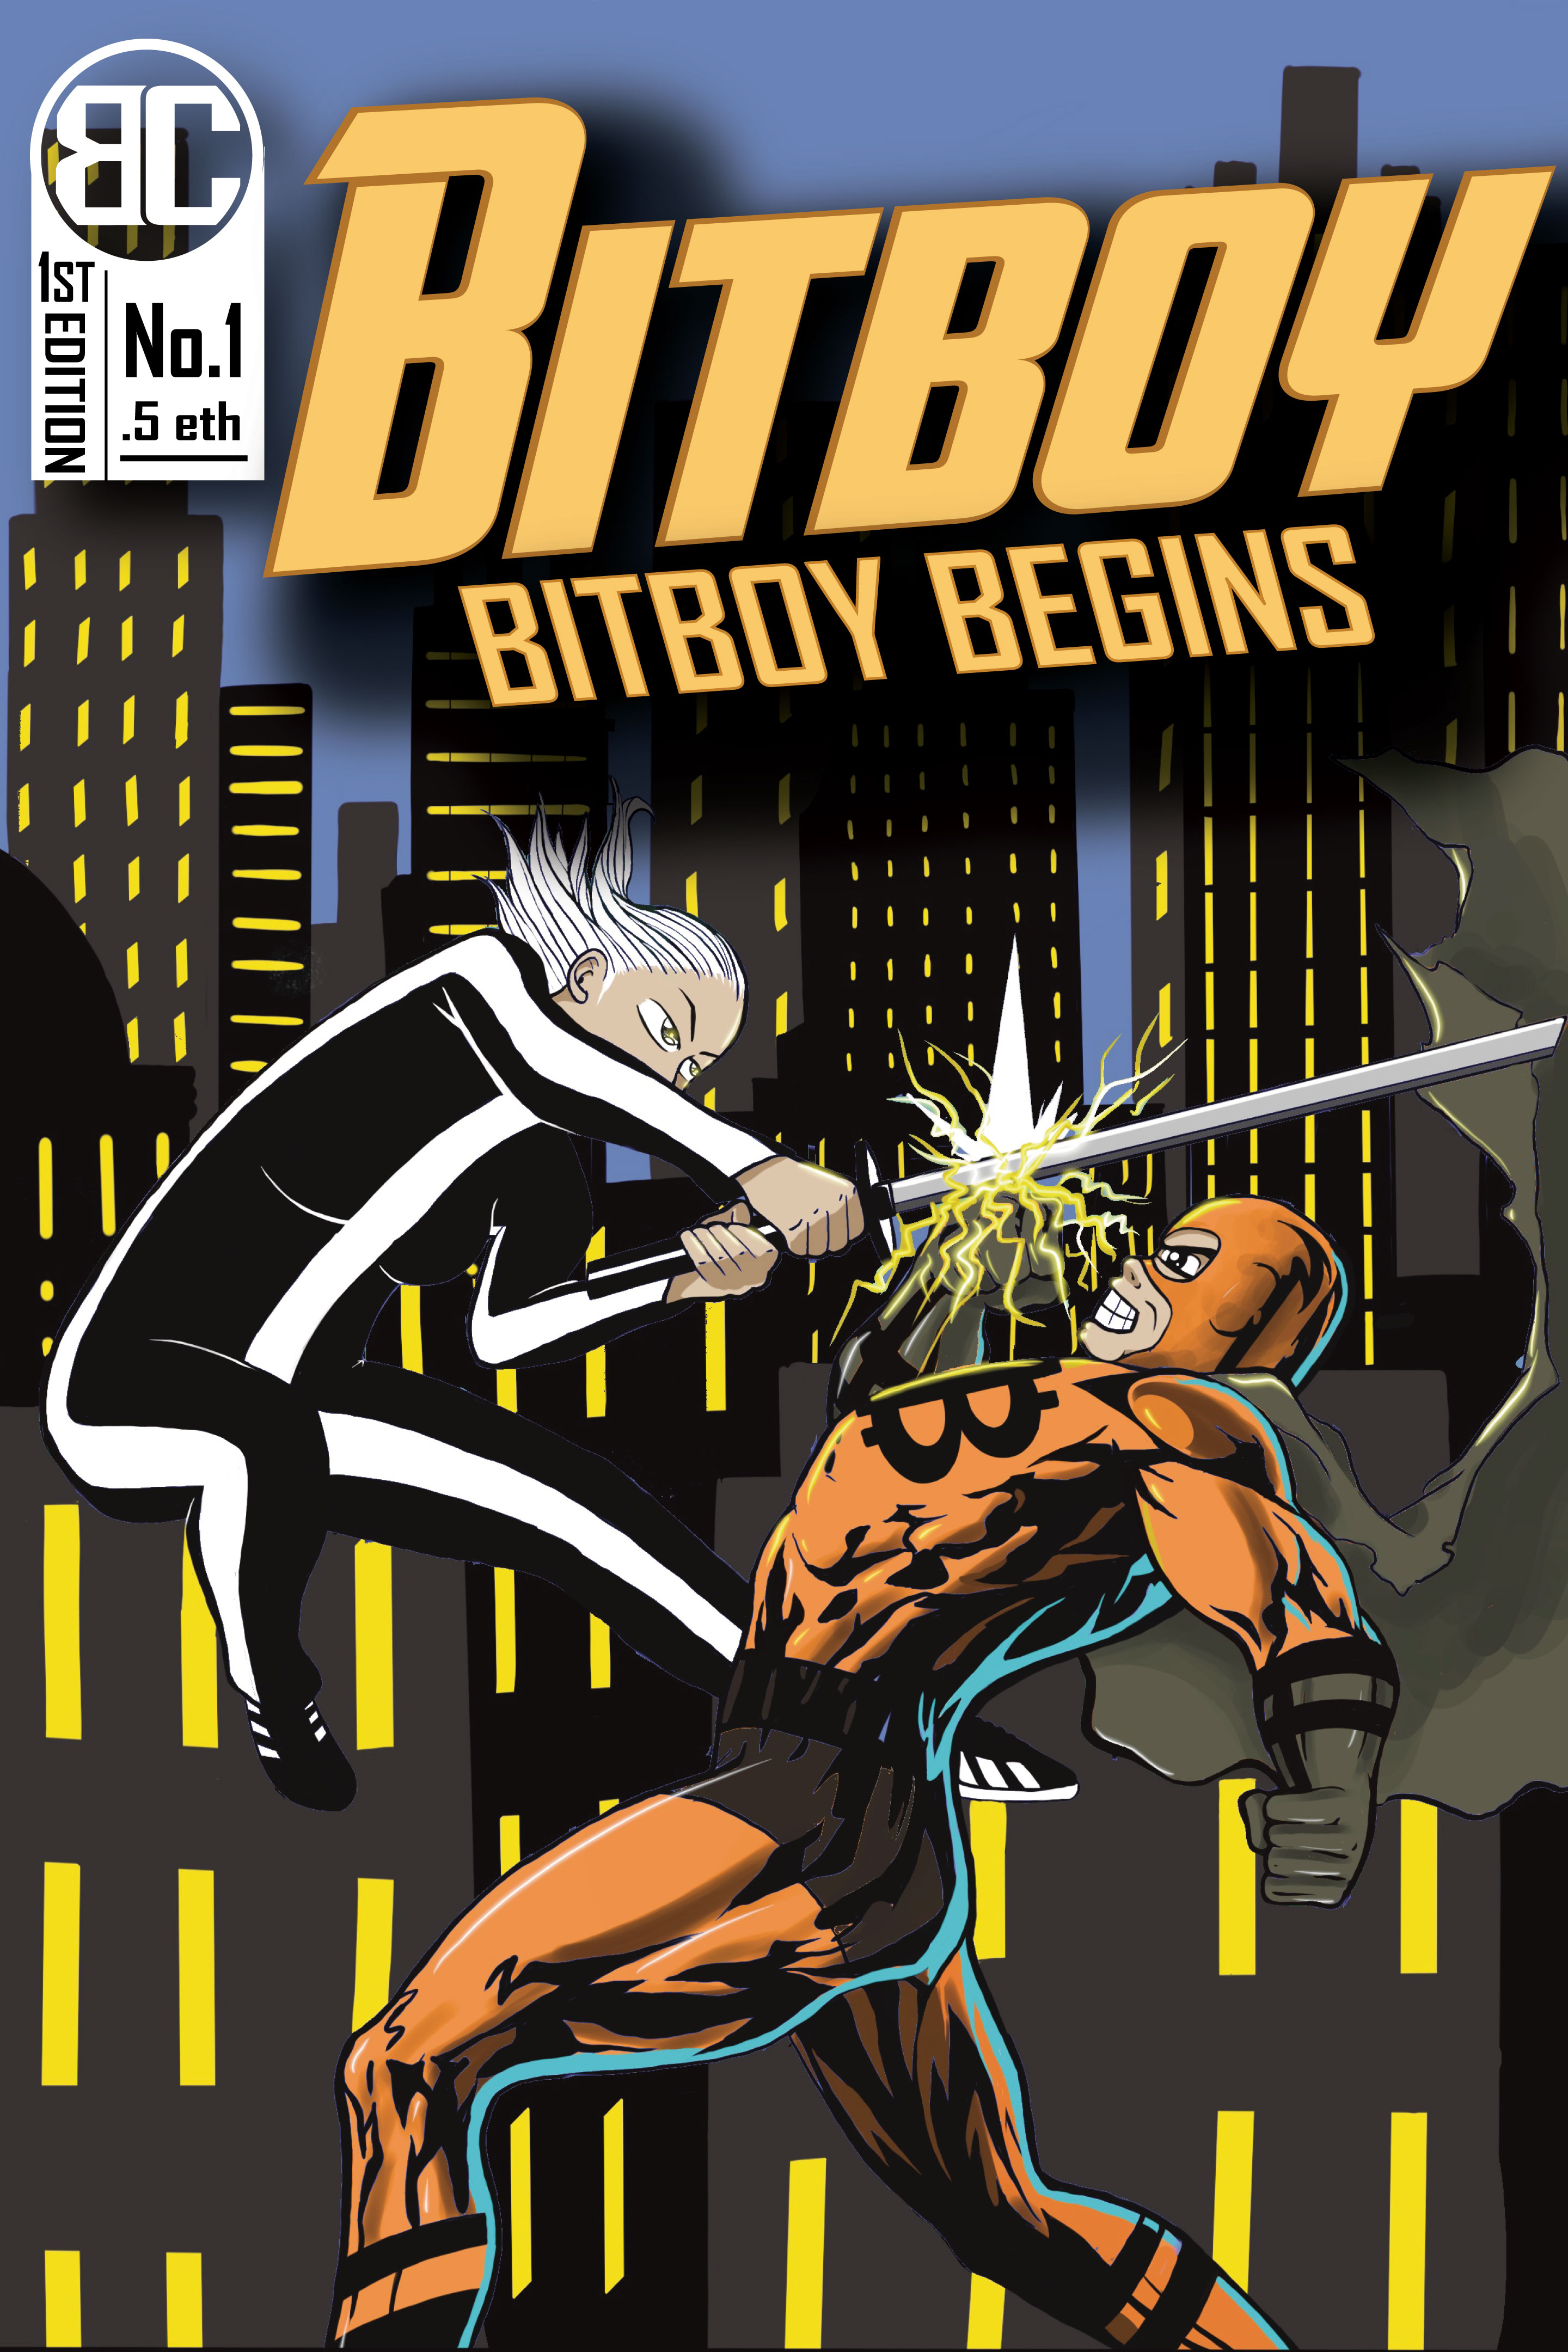 1st Edition Bitboy >>> Bitboy Begins <<< comic book cover